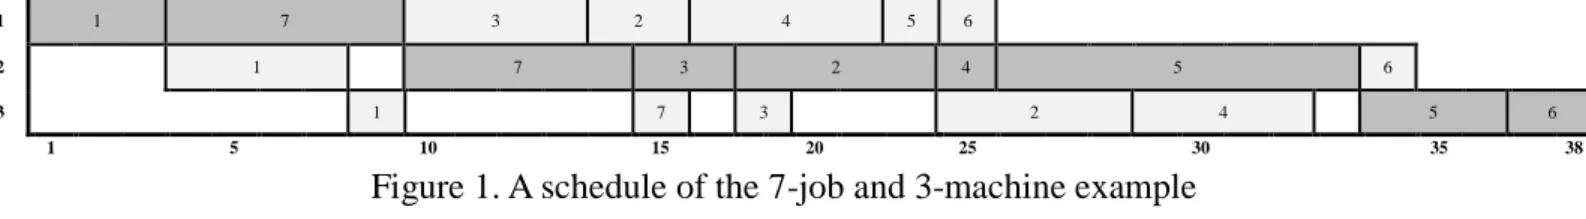 Figure 1. A schedule of the 7-job and 3-machine example 